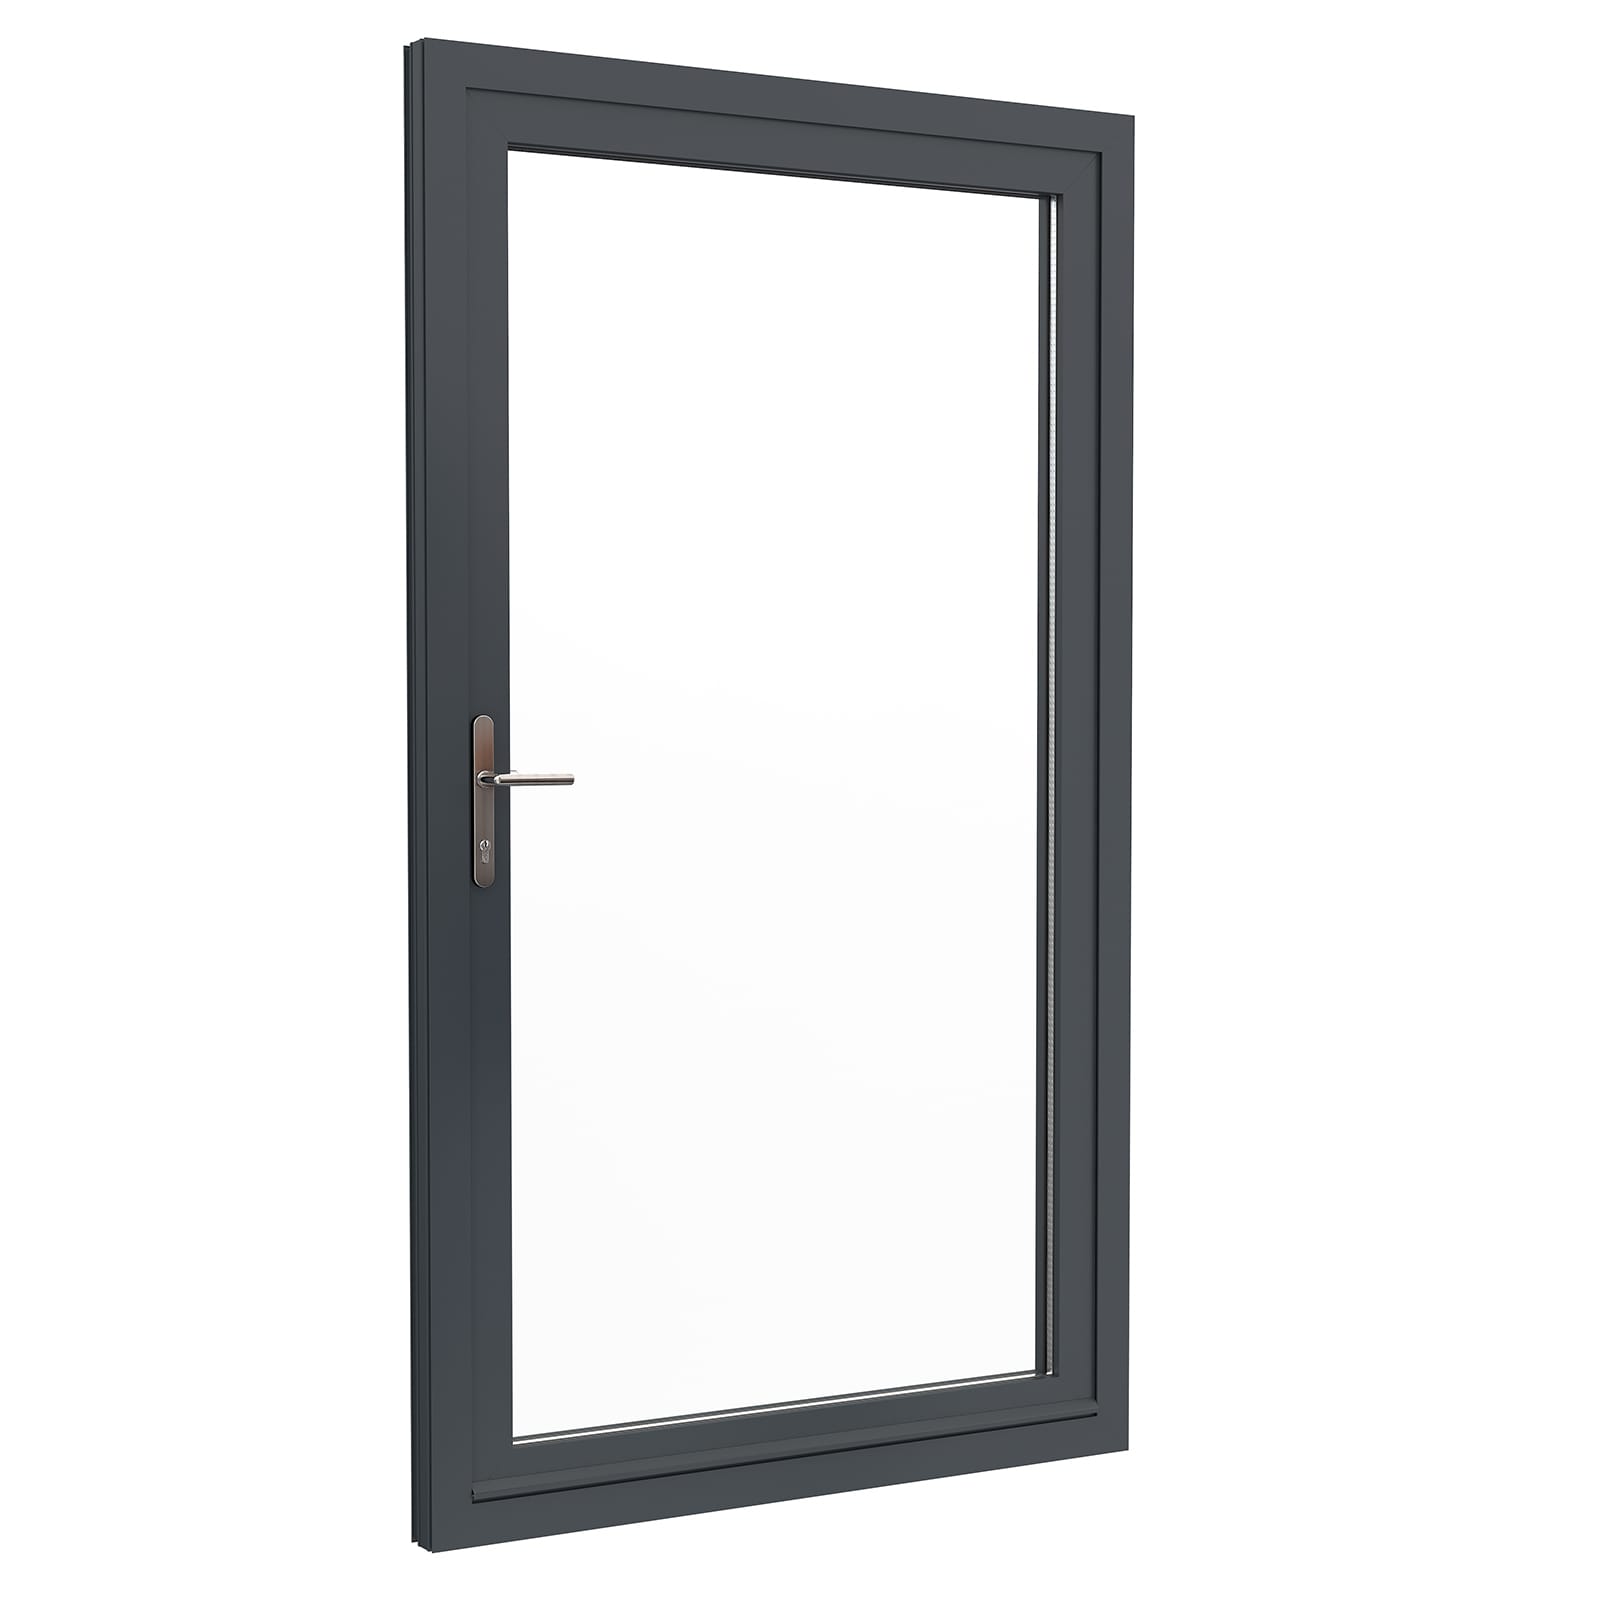 Alitherm 400 Door with full height glass